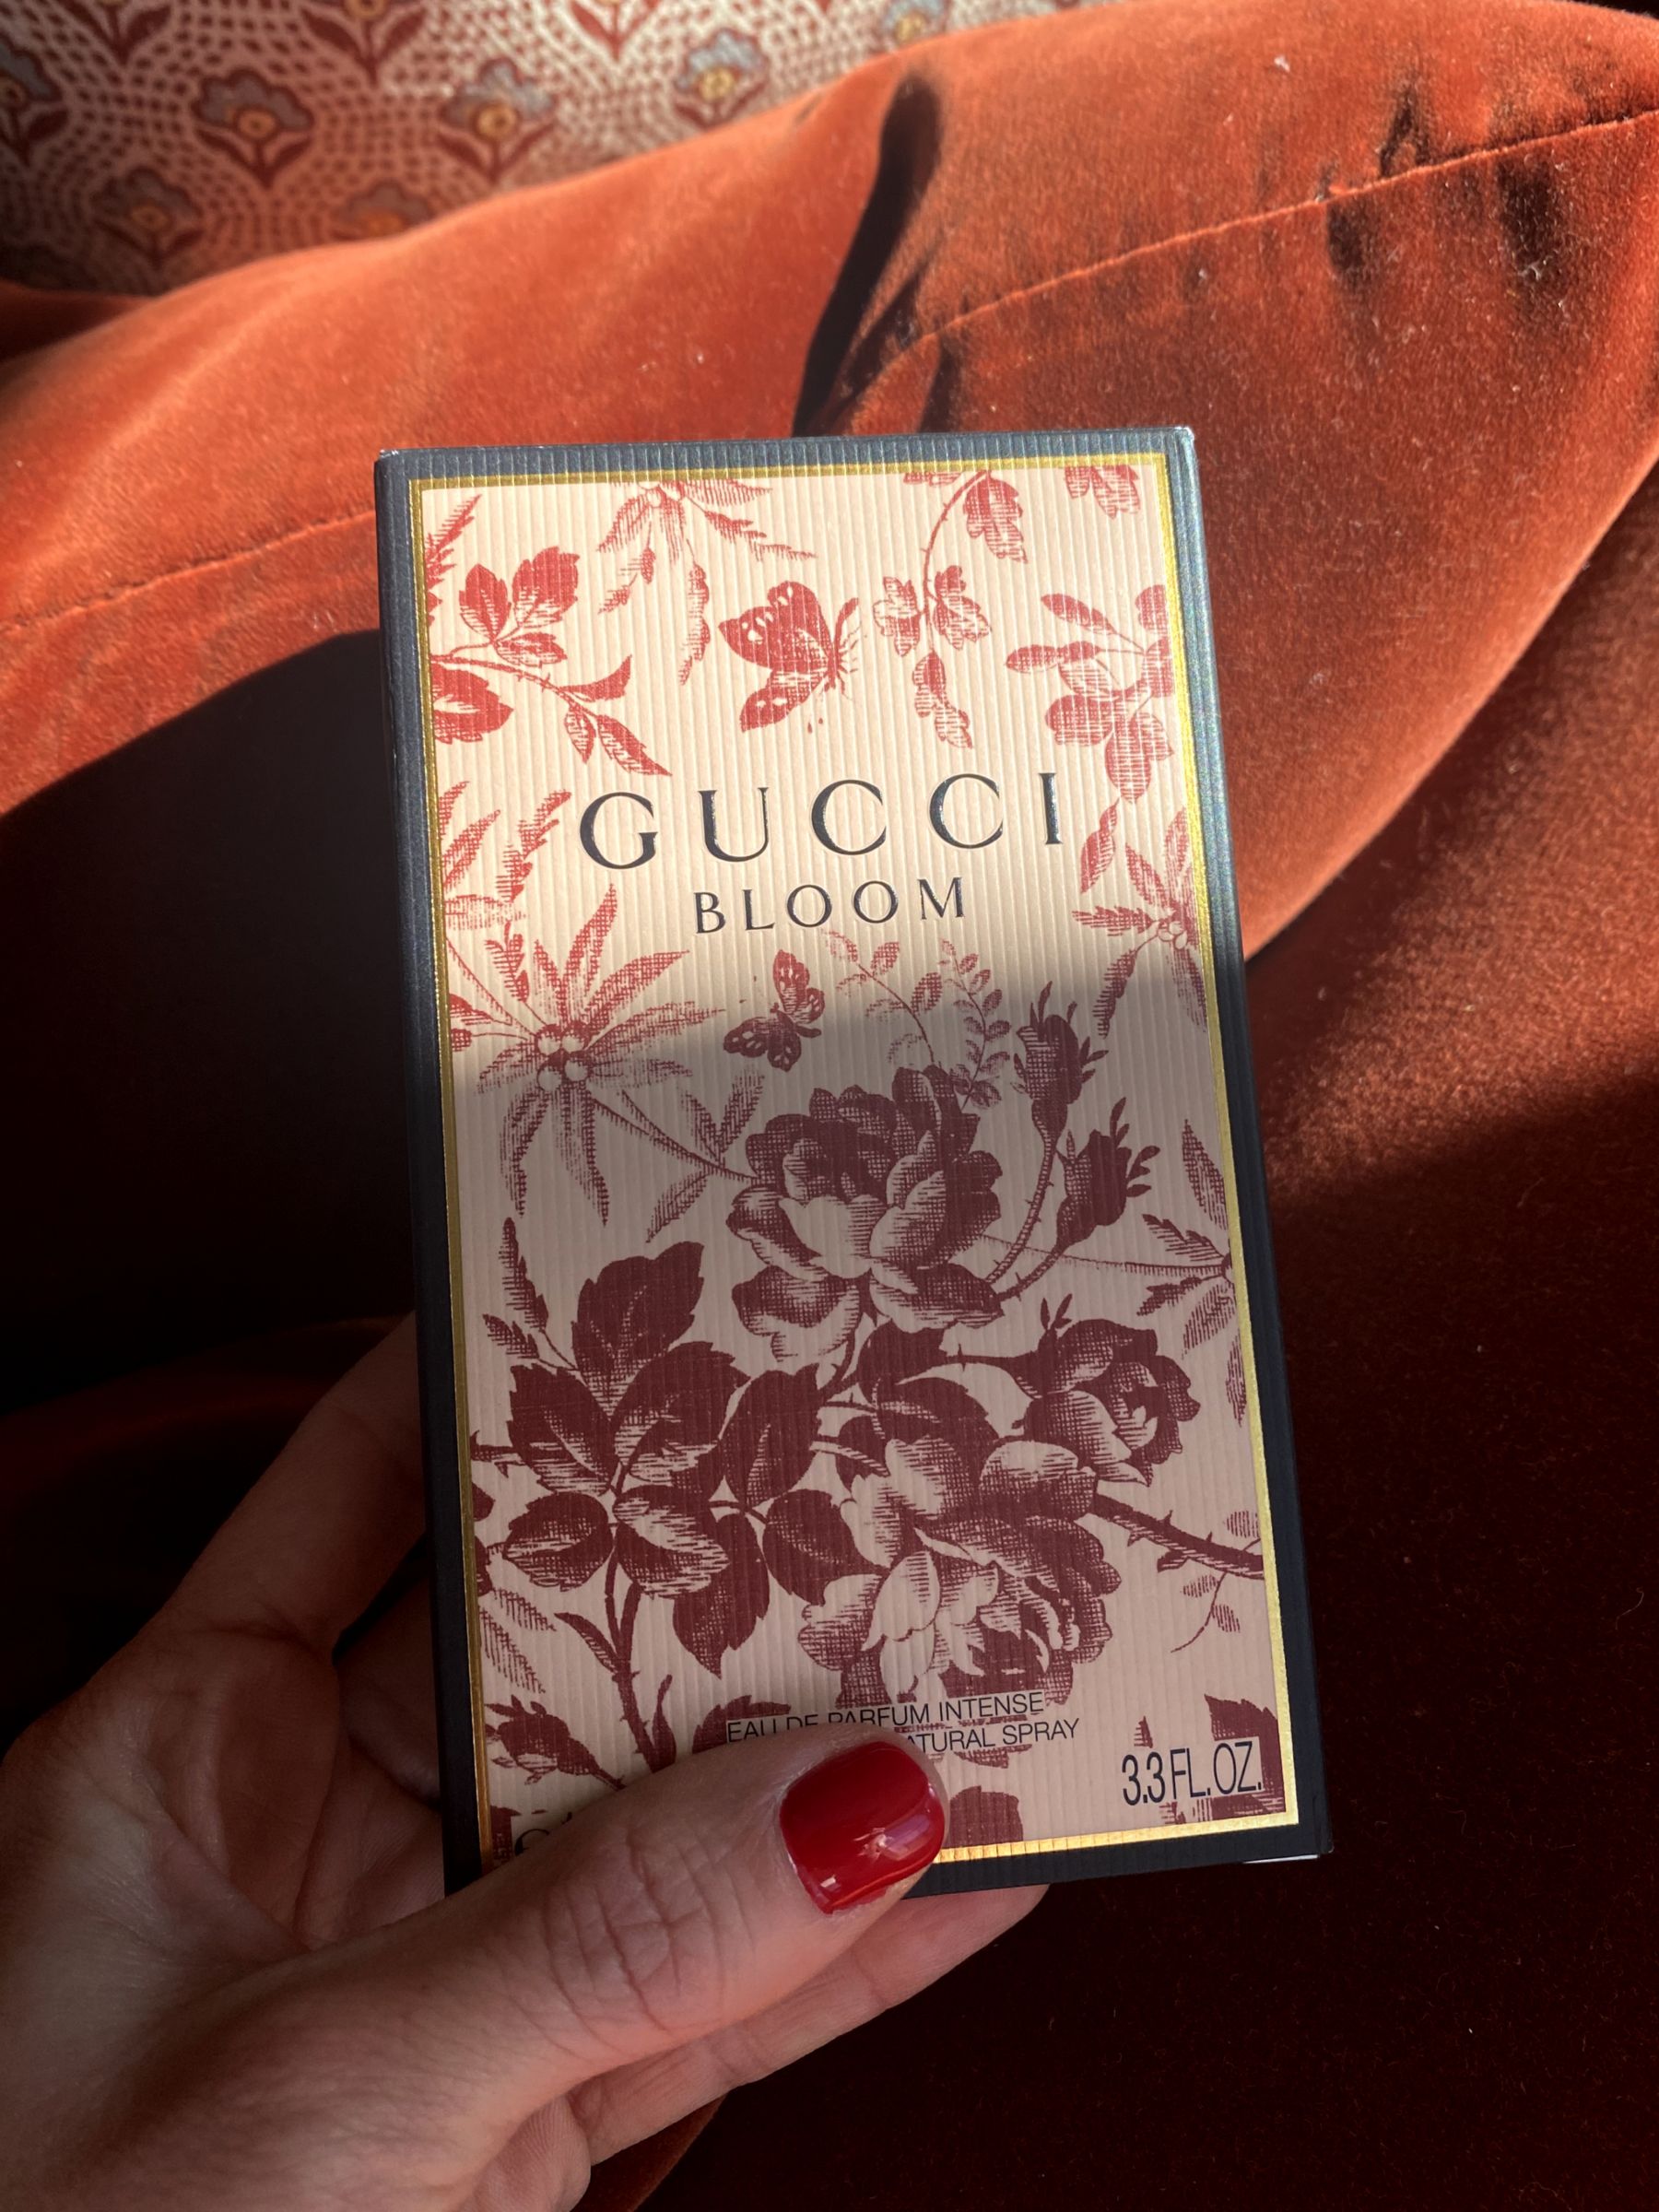 Gucci Bloom Intense boxed